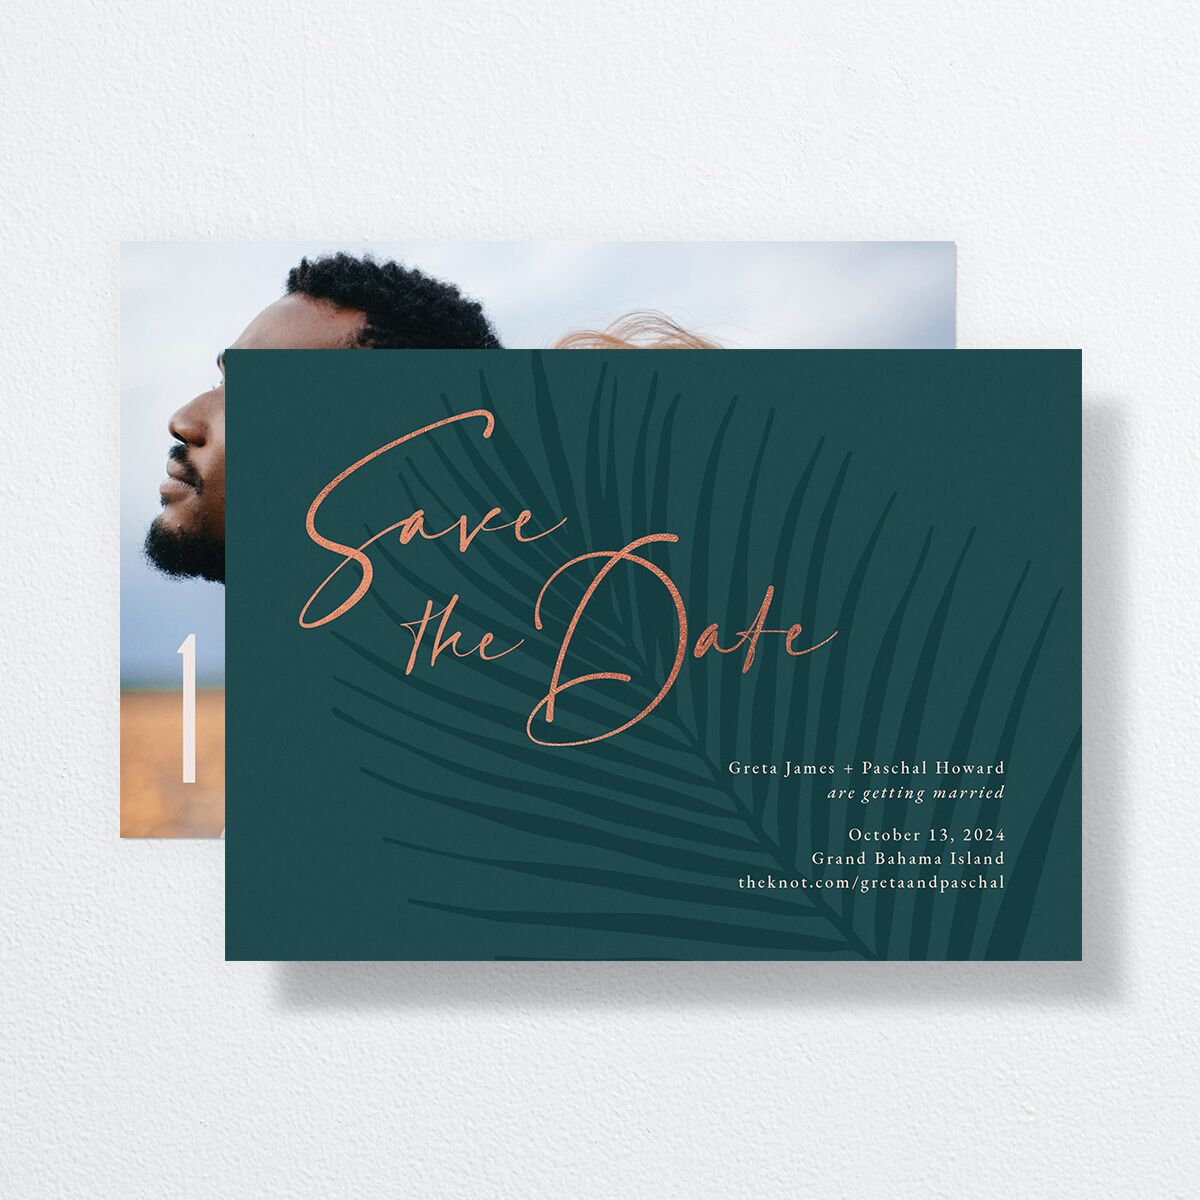 Lavish Palm Save The Date Cards front-and-back in teal